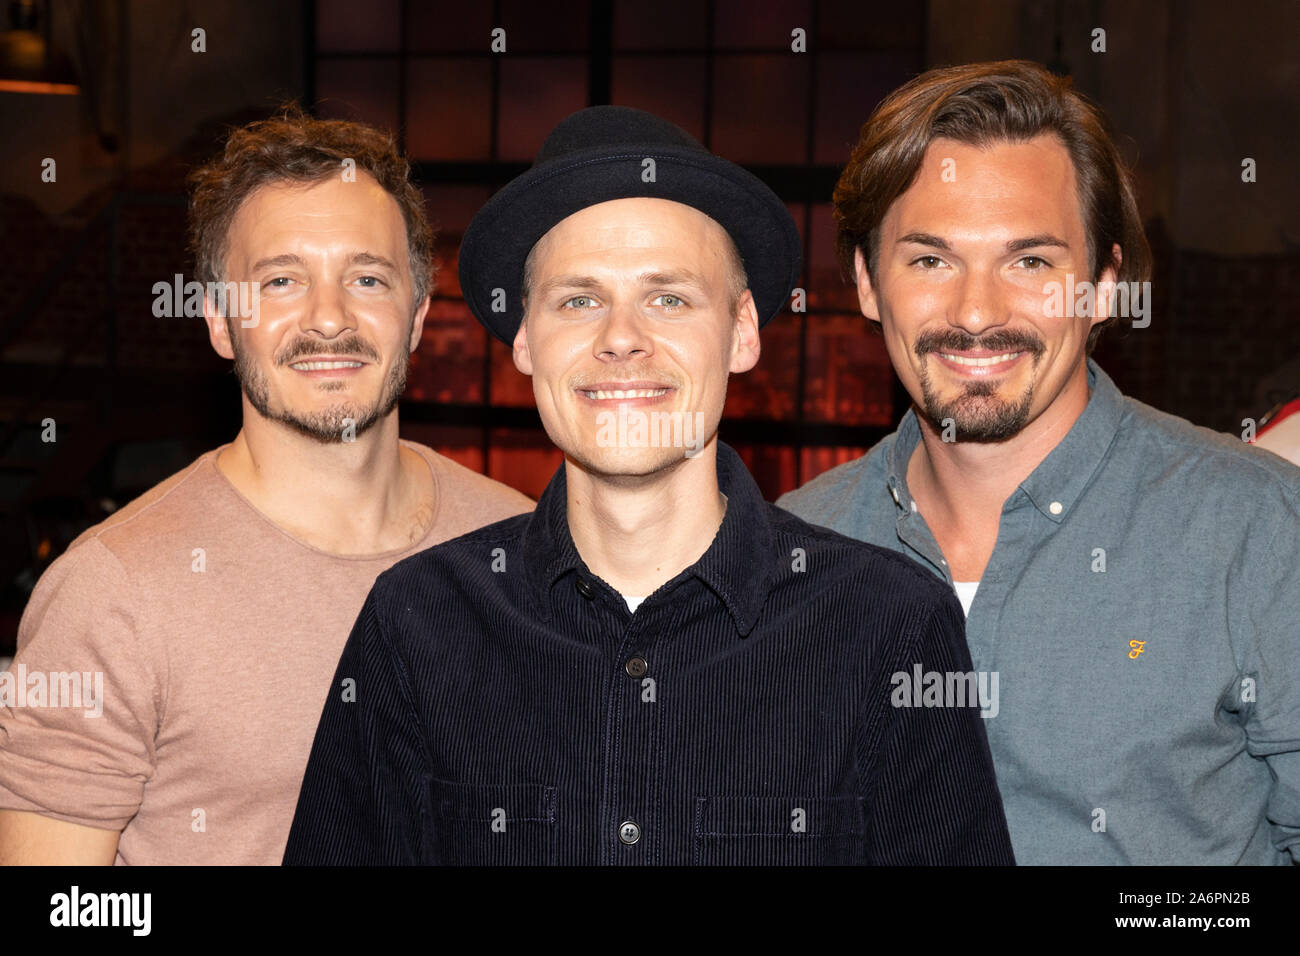 Oliver NIESEN (middle), singer of the band Cat Ballou, with the band members Hannes FEDER (left) and Dominik SCHOENENBORN (SCHÃ NENBORN) (right), portrait, portrait PortrÃ t, half-length portrait, friendly, looking at the camera. 'Koelner Treff' episode 520 on WDR Fernsehen, 25.10.2019. | Usage worldwide Stock Photo